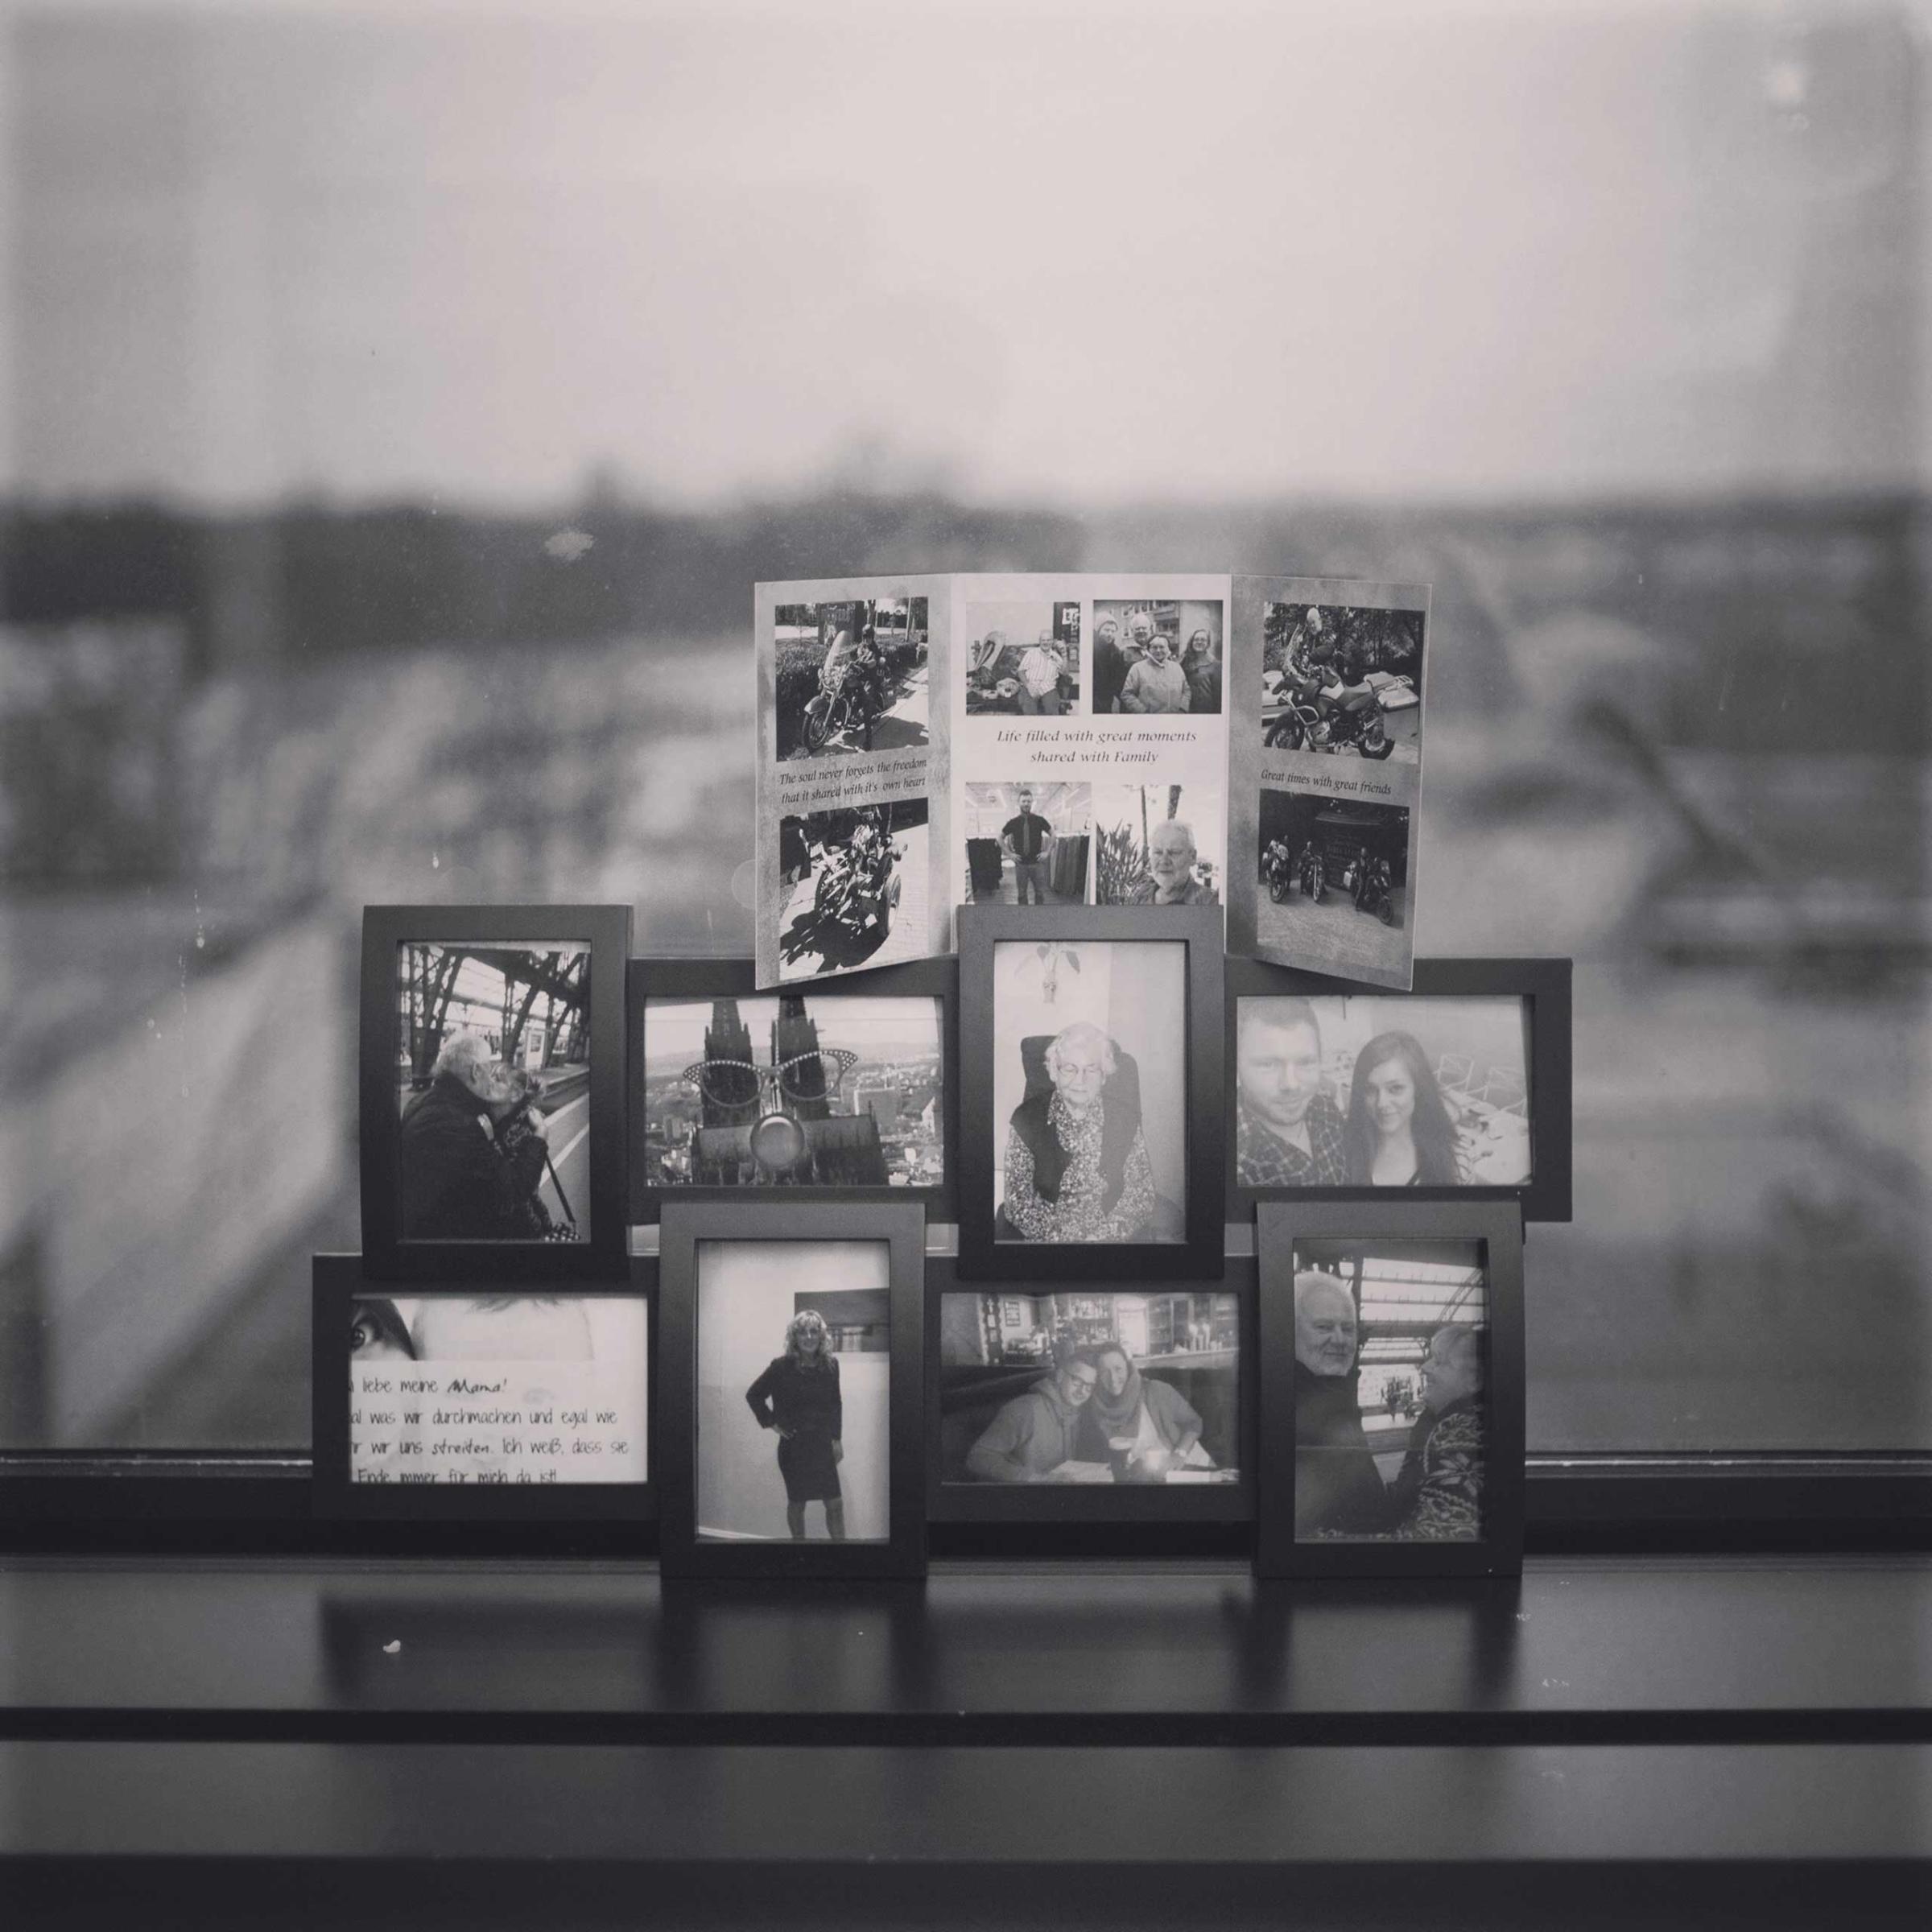 Ian Willms' We Shall See Instagram Project